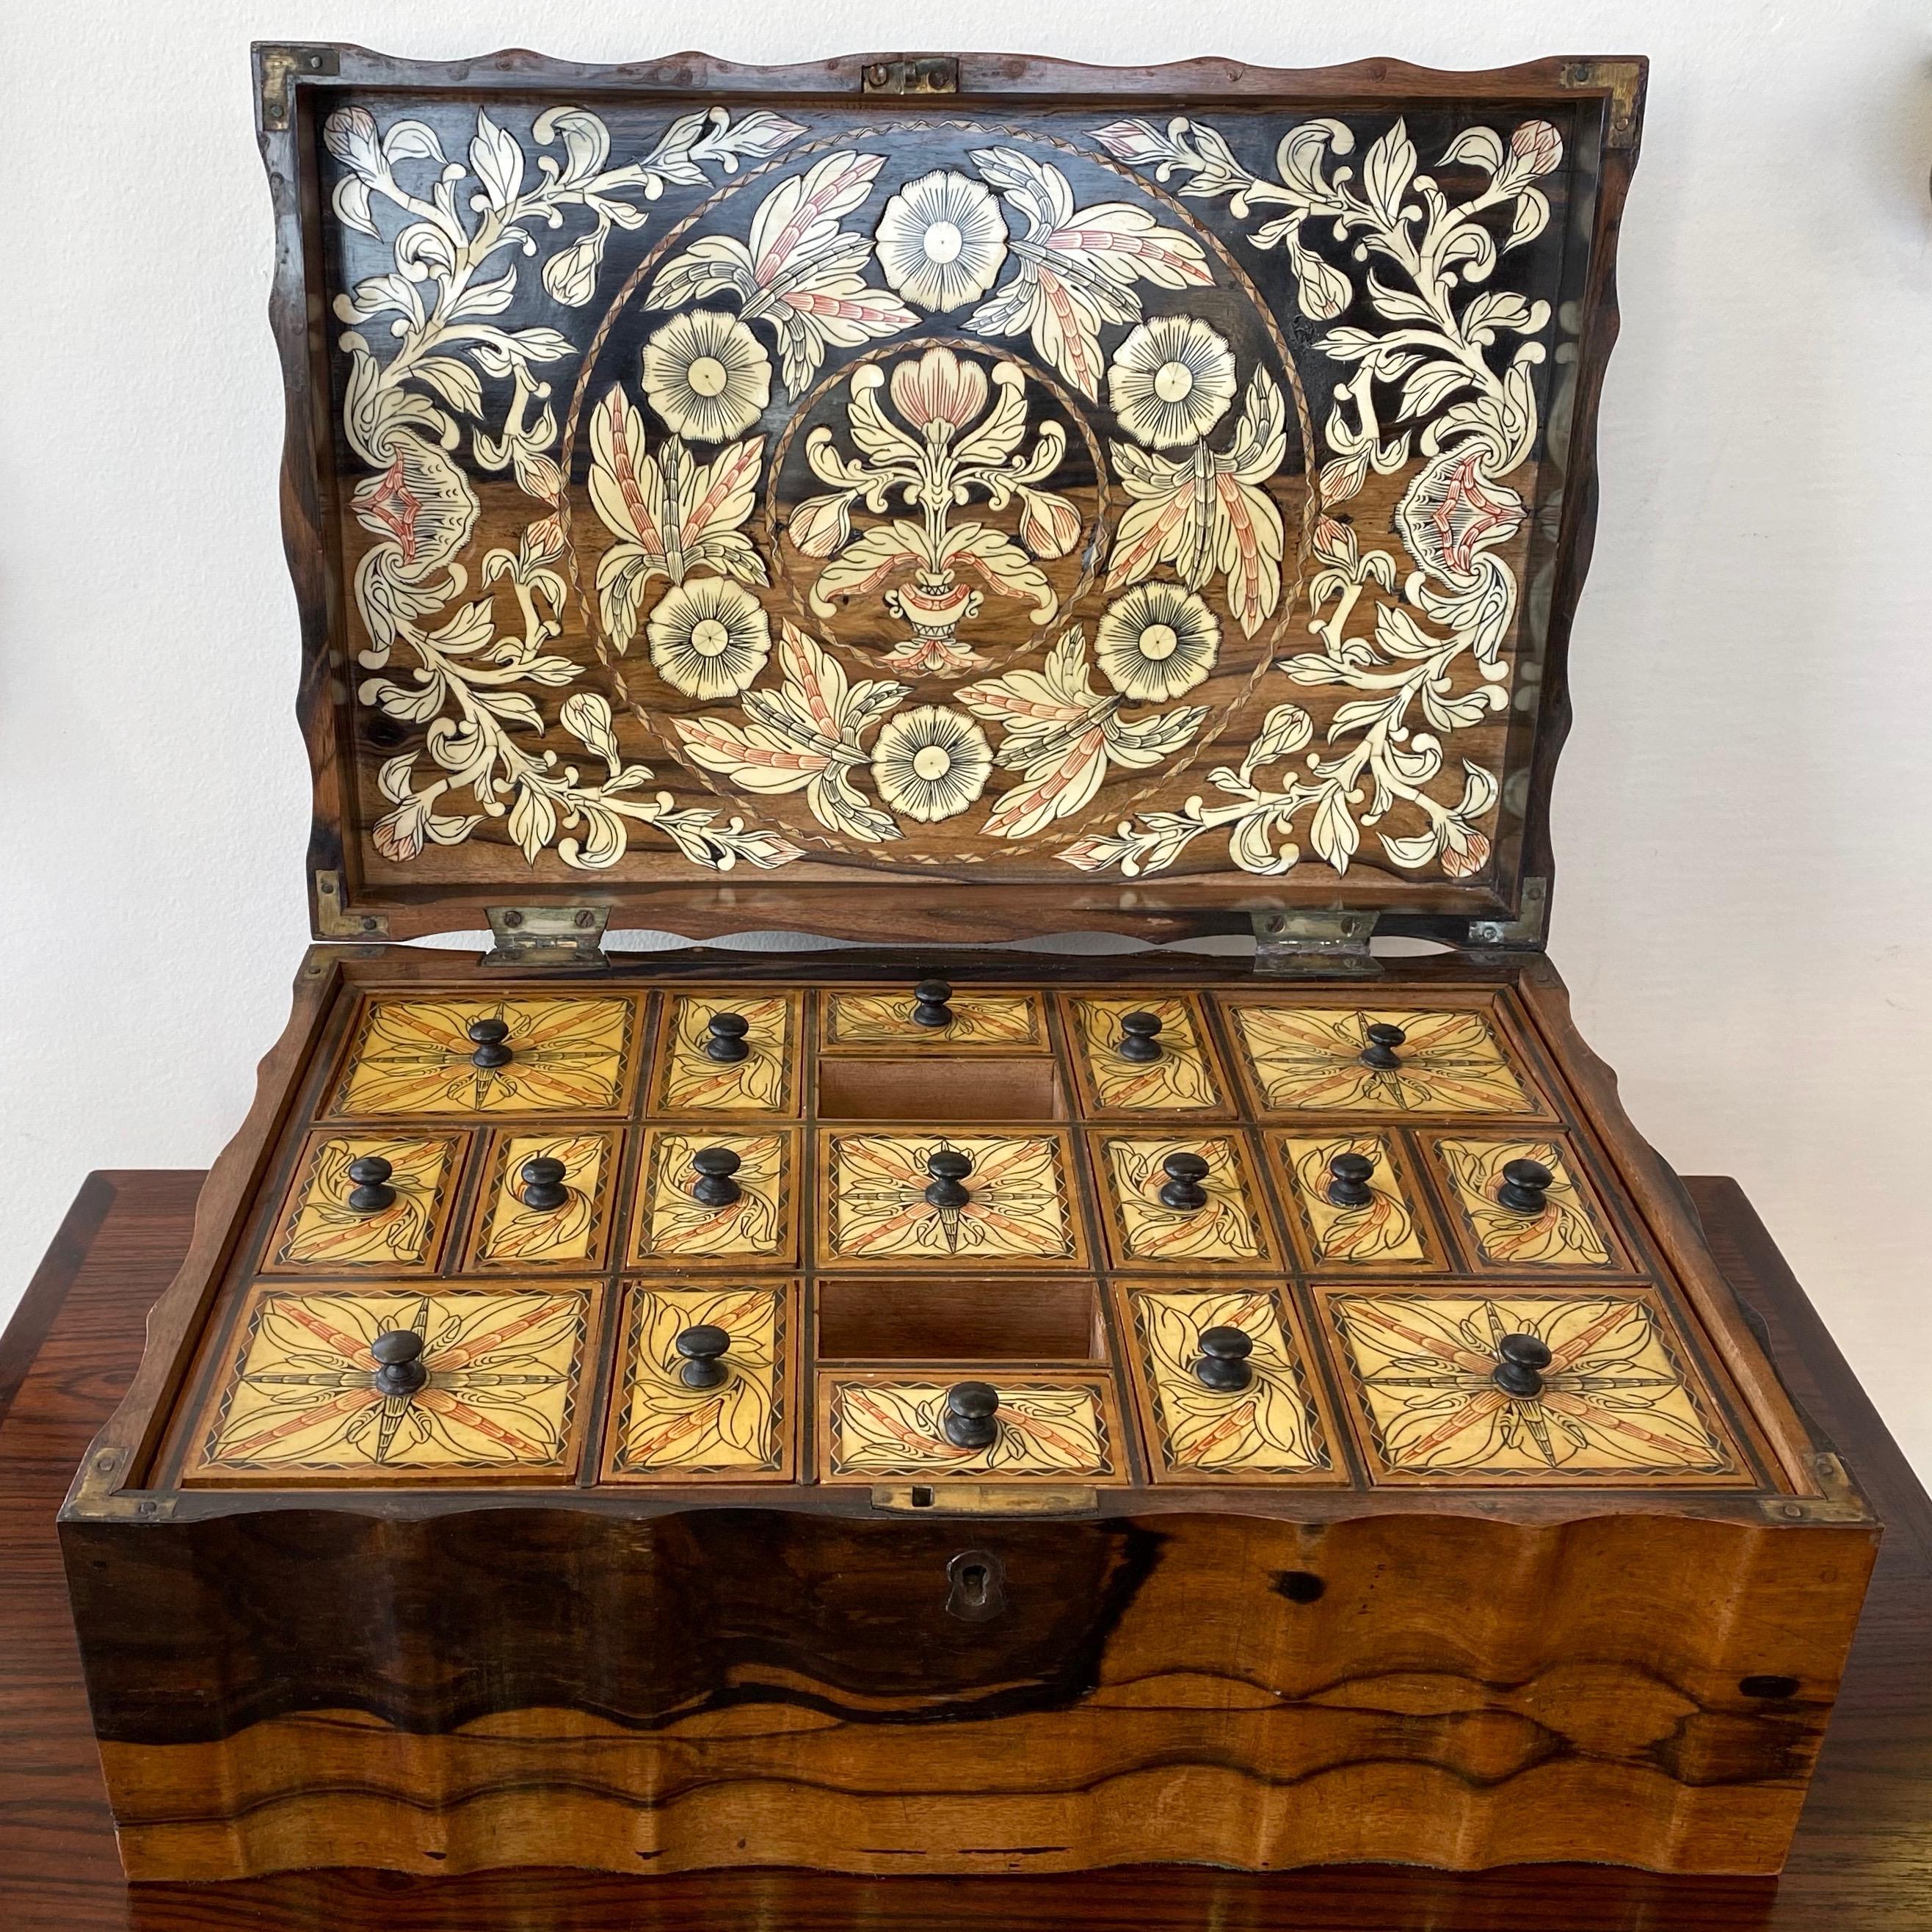 A very striking late 1800s Anglo-Ceylonese coromandel work, sewing, or companion box with exceptional bone, wood, and brass inlay and decoration.

Case of handsomely figured and variegated coromandel (calamander) veneer with serpentine sides. Hinged